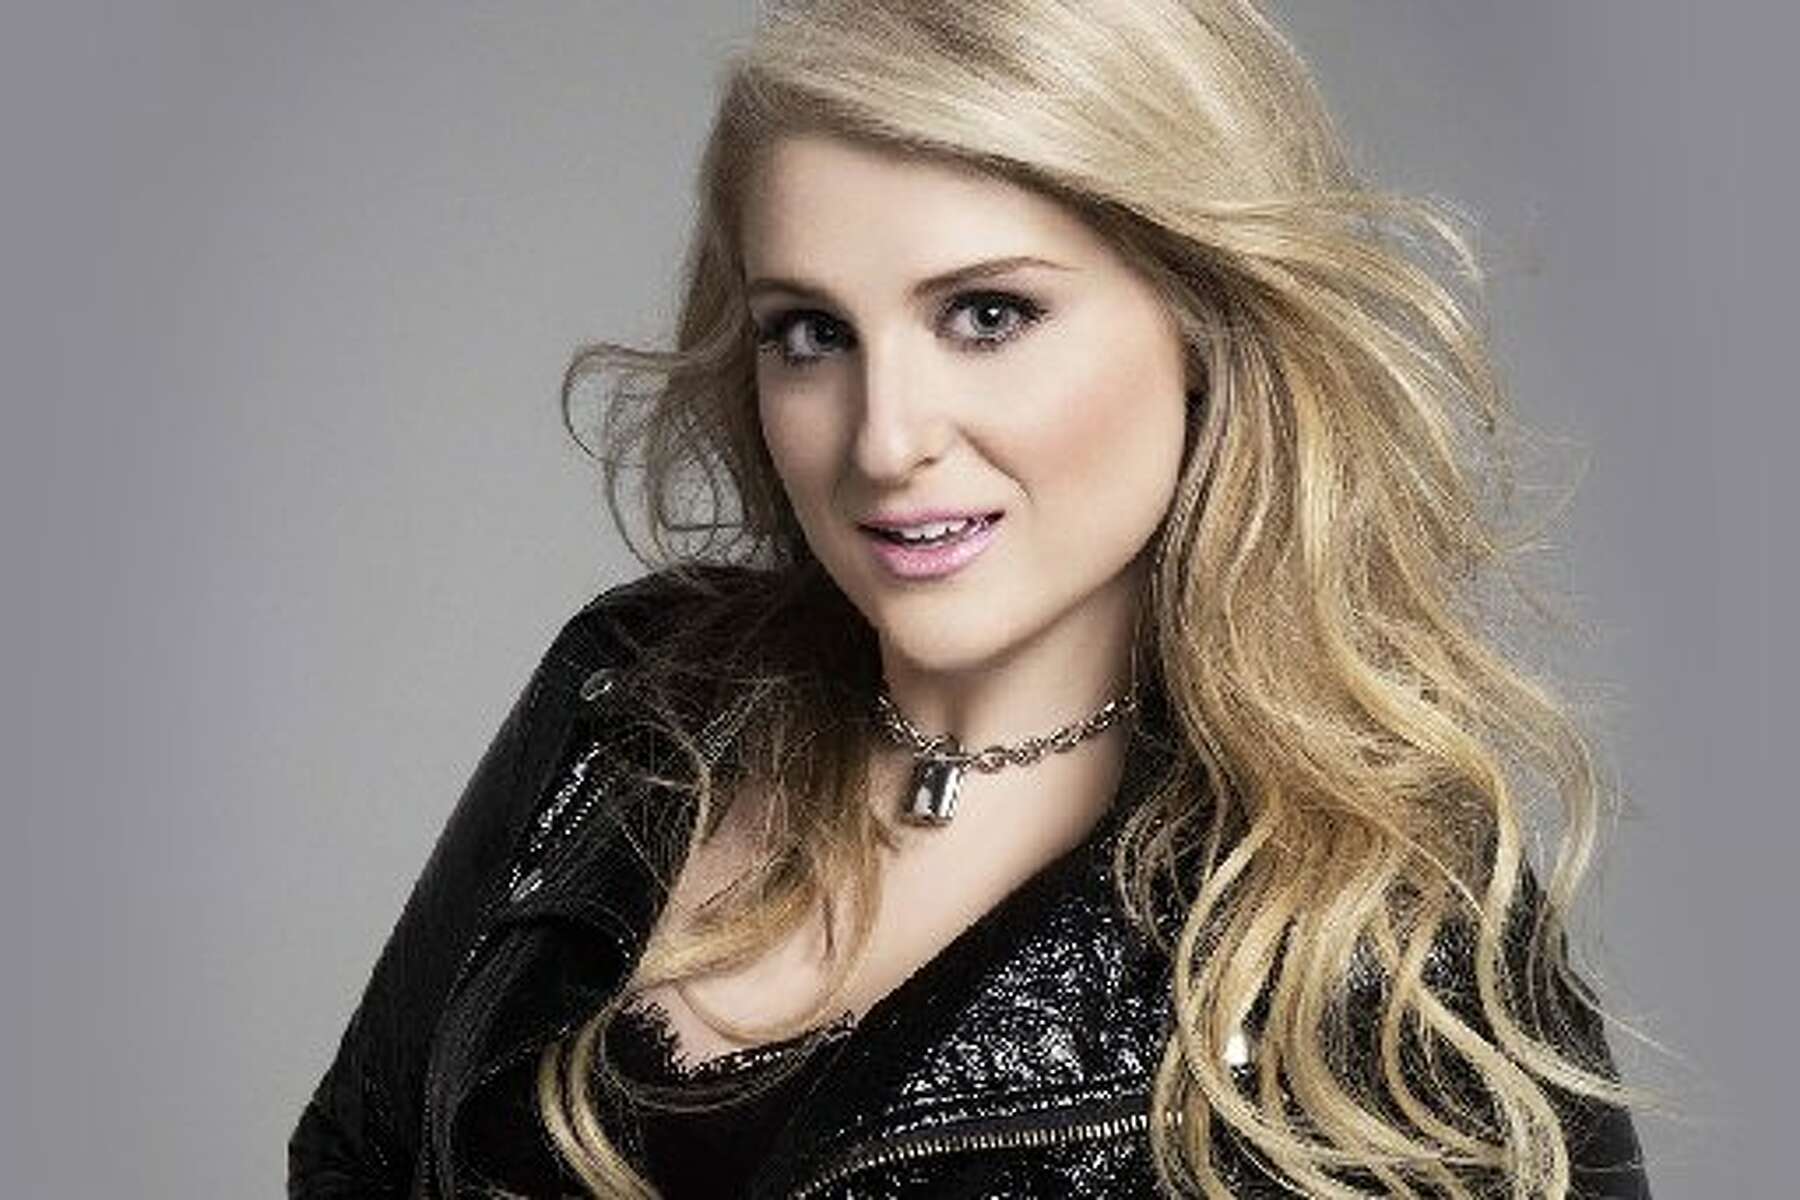 meghantrainor and a loyal fan teared up seeing each other again on